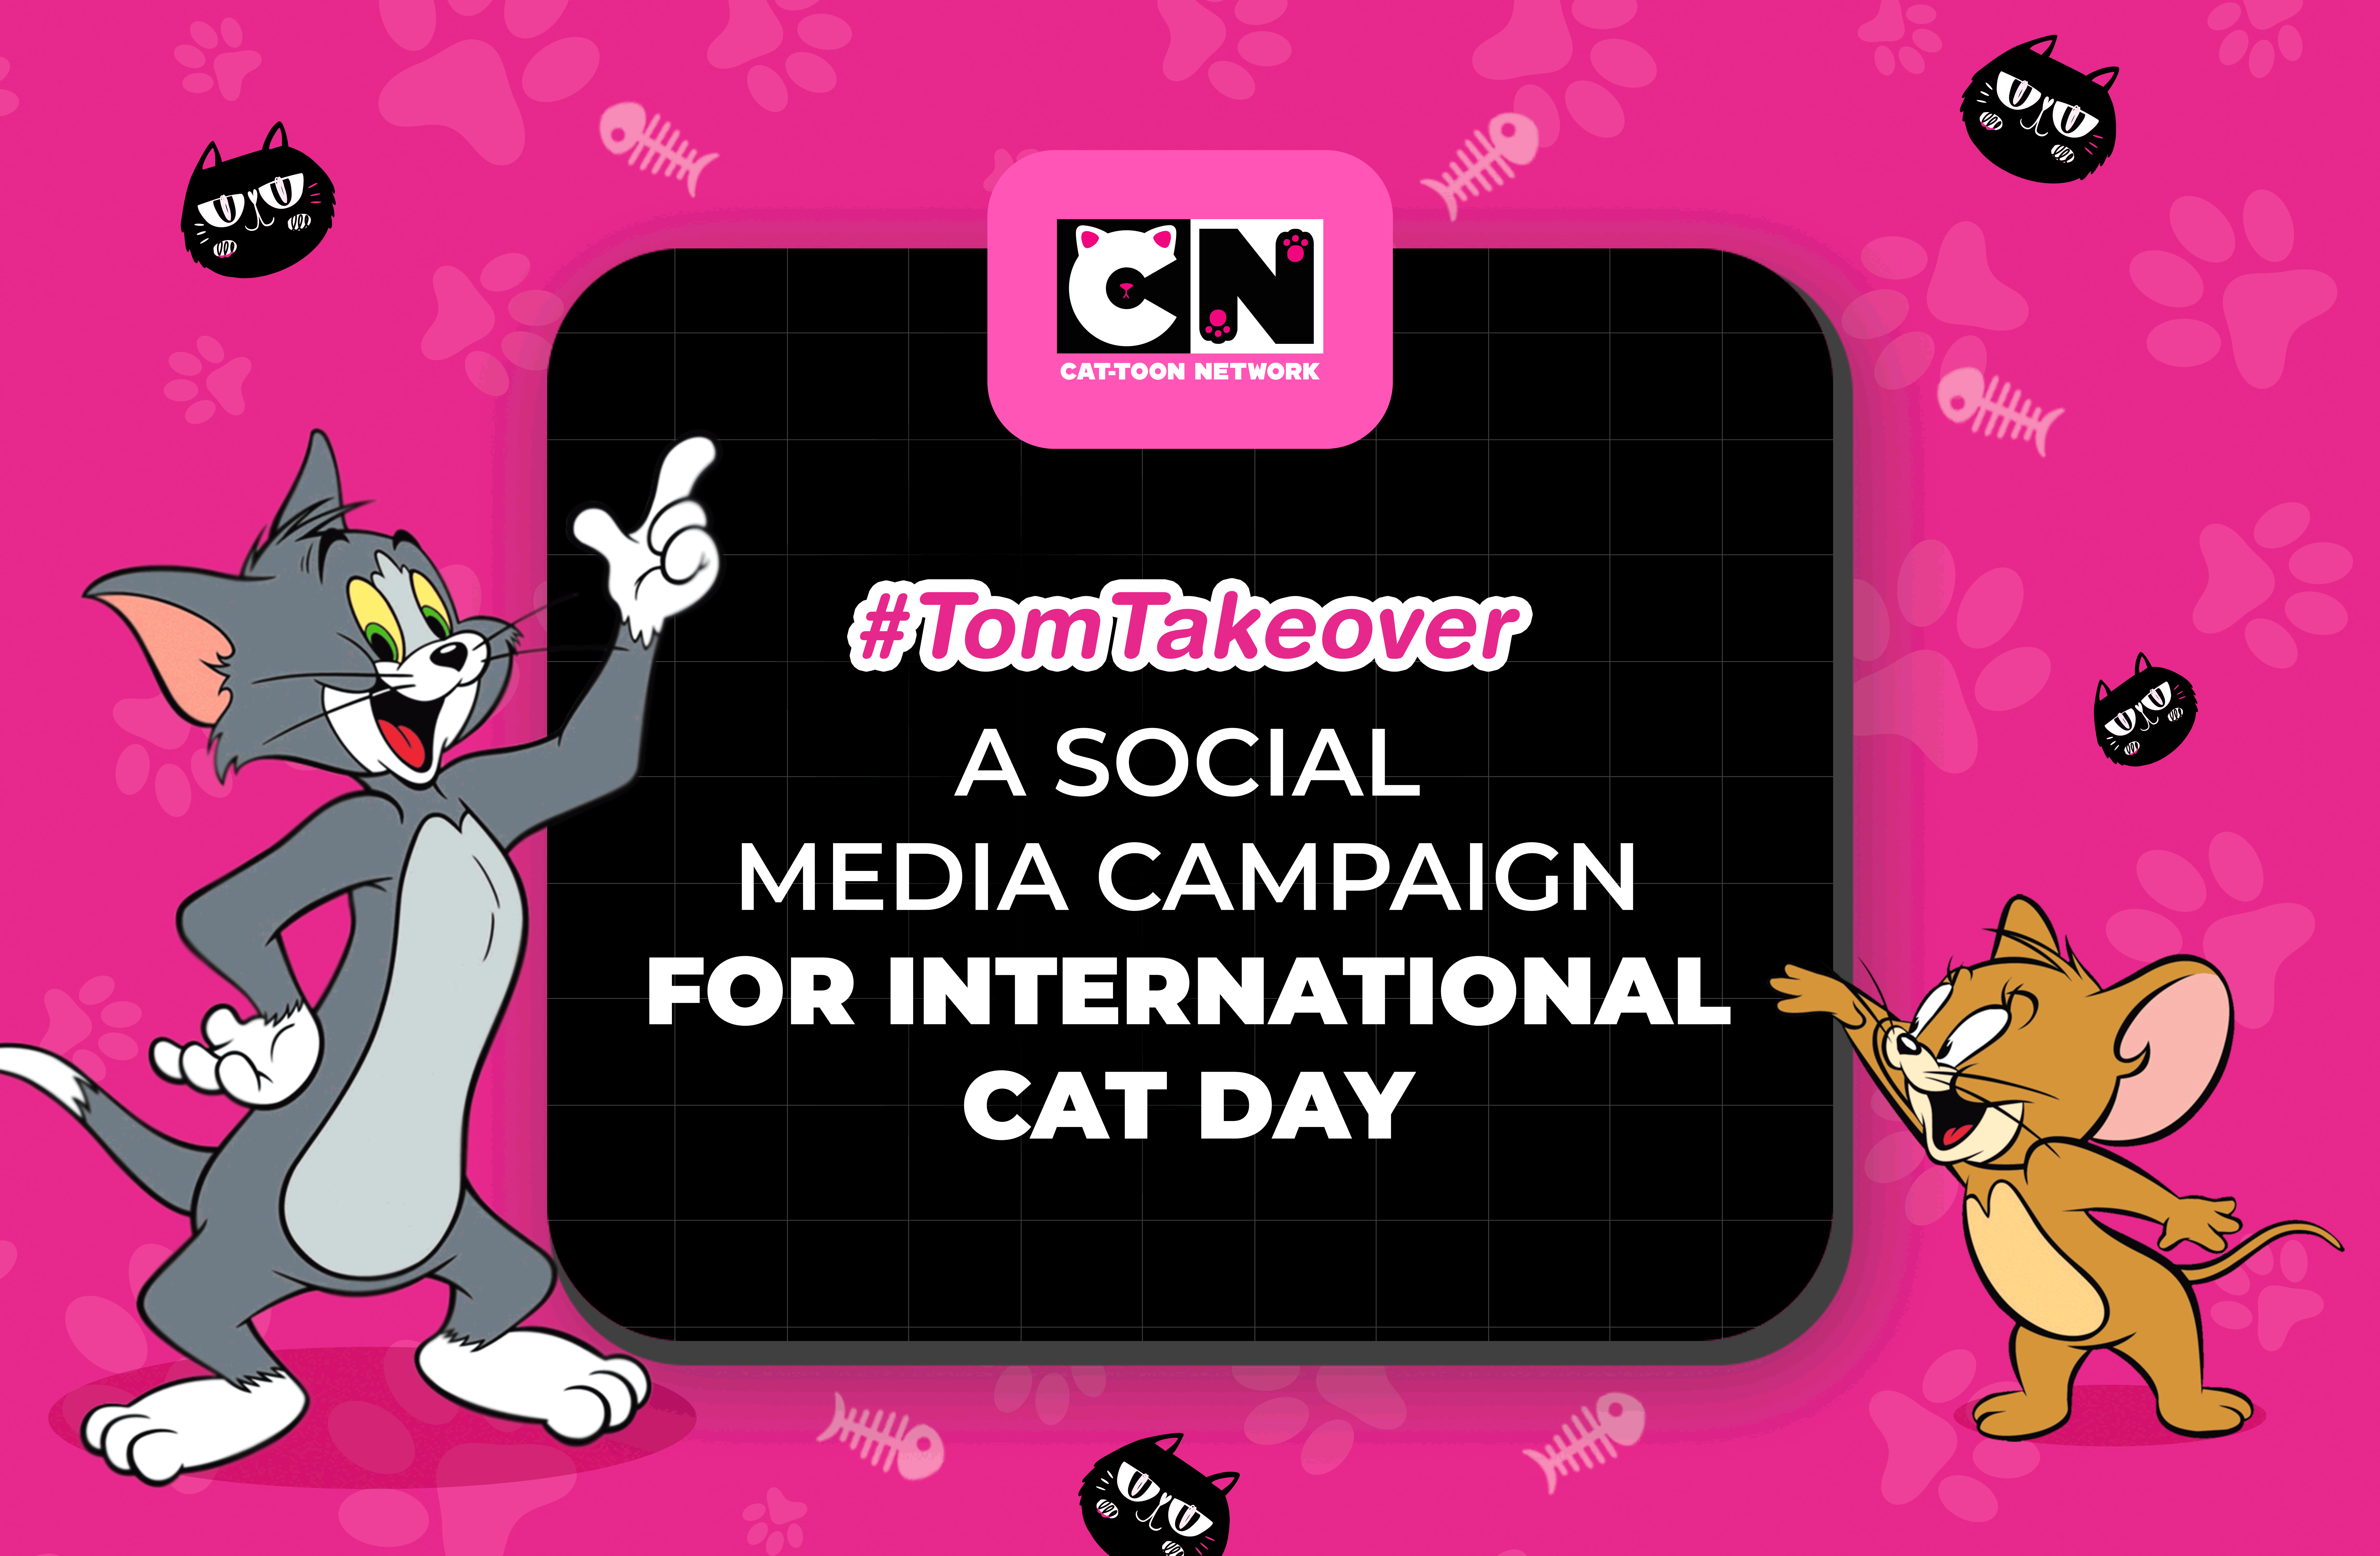 International Cat Day - Social Media Campaign - #TomTakeover